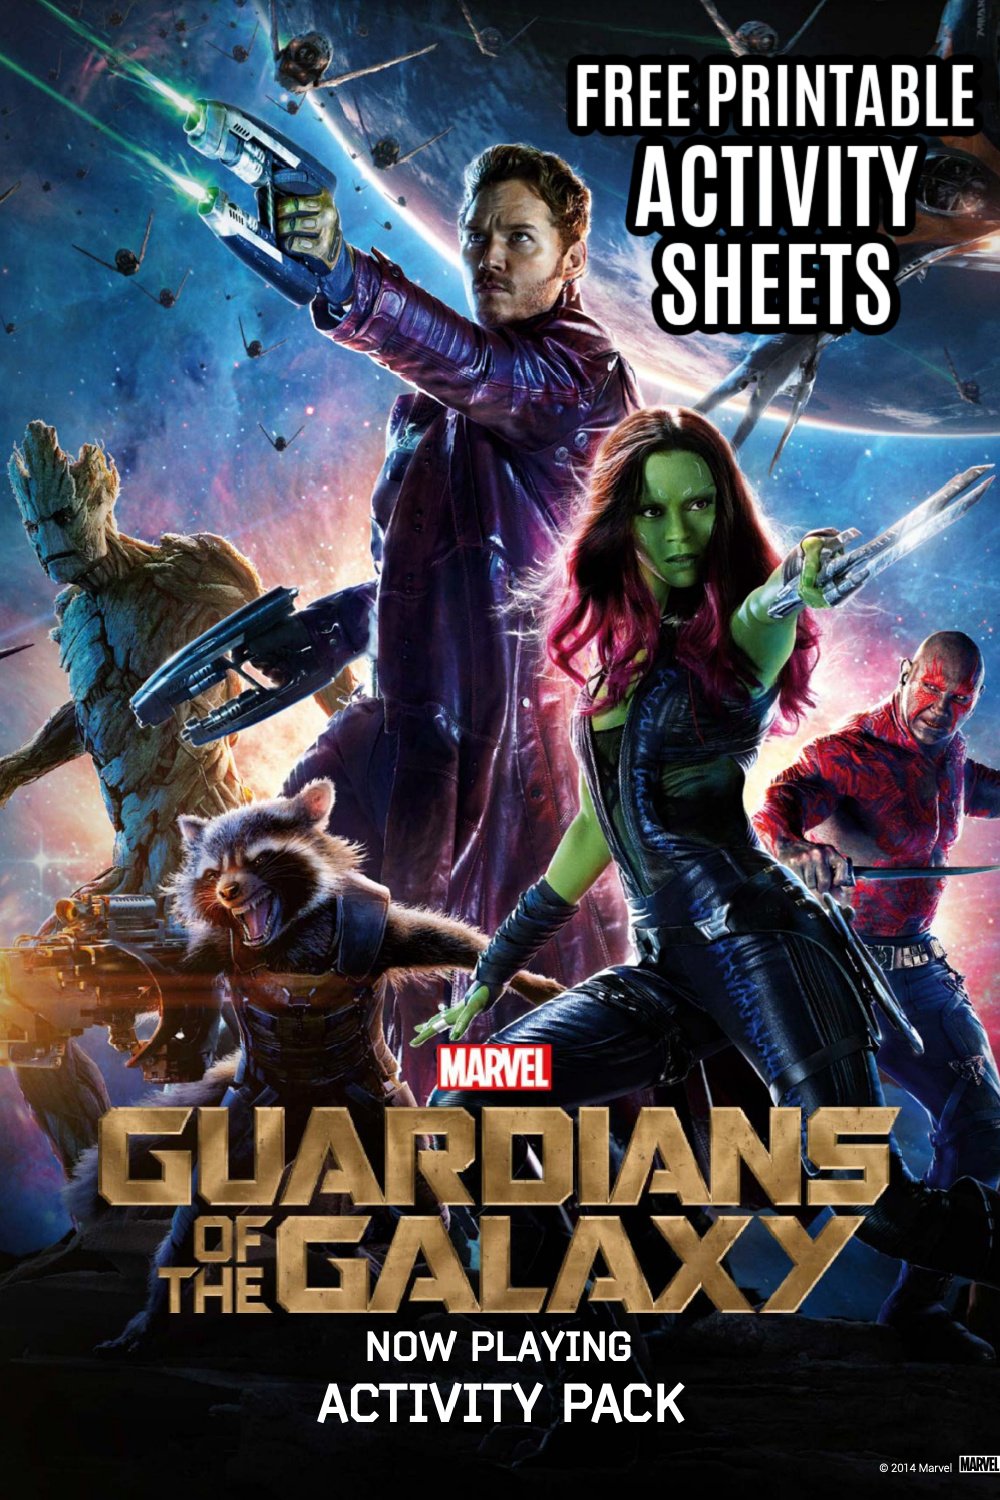 FREE PRINTABLE GUARDIANS OF THE GALAXY ACTIVITY SHEETS